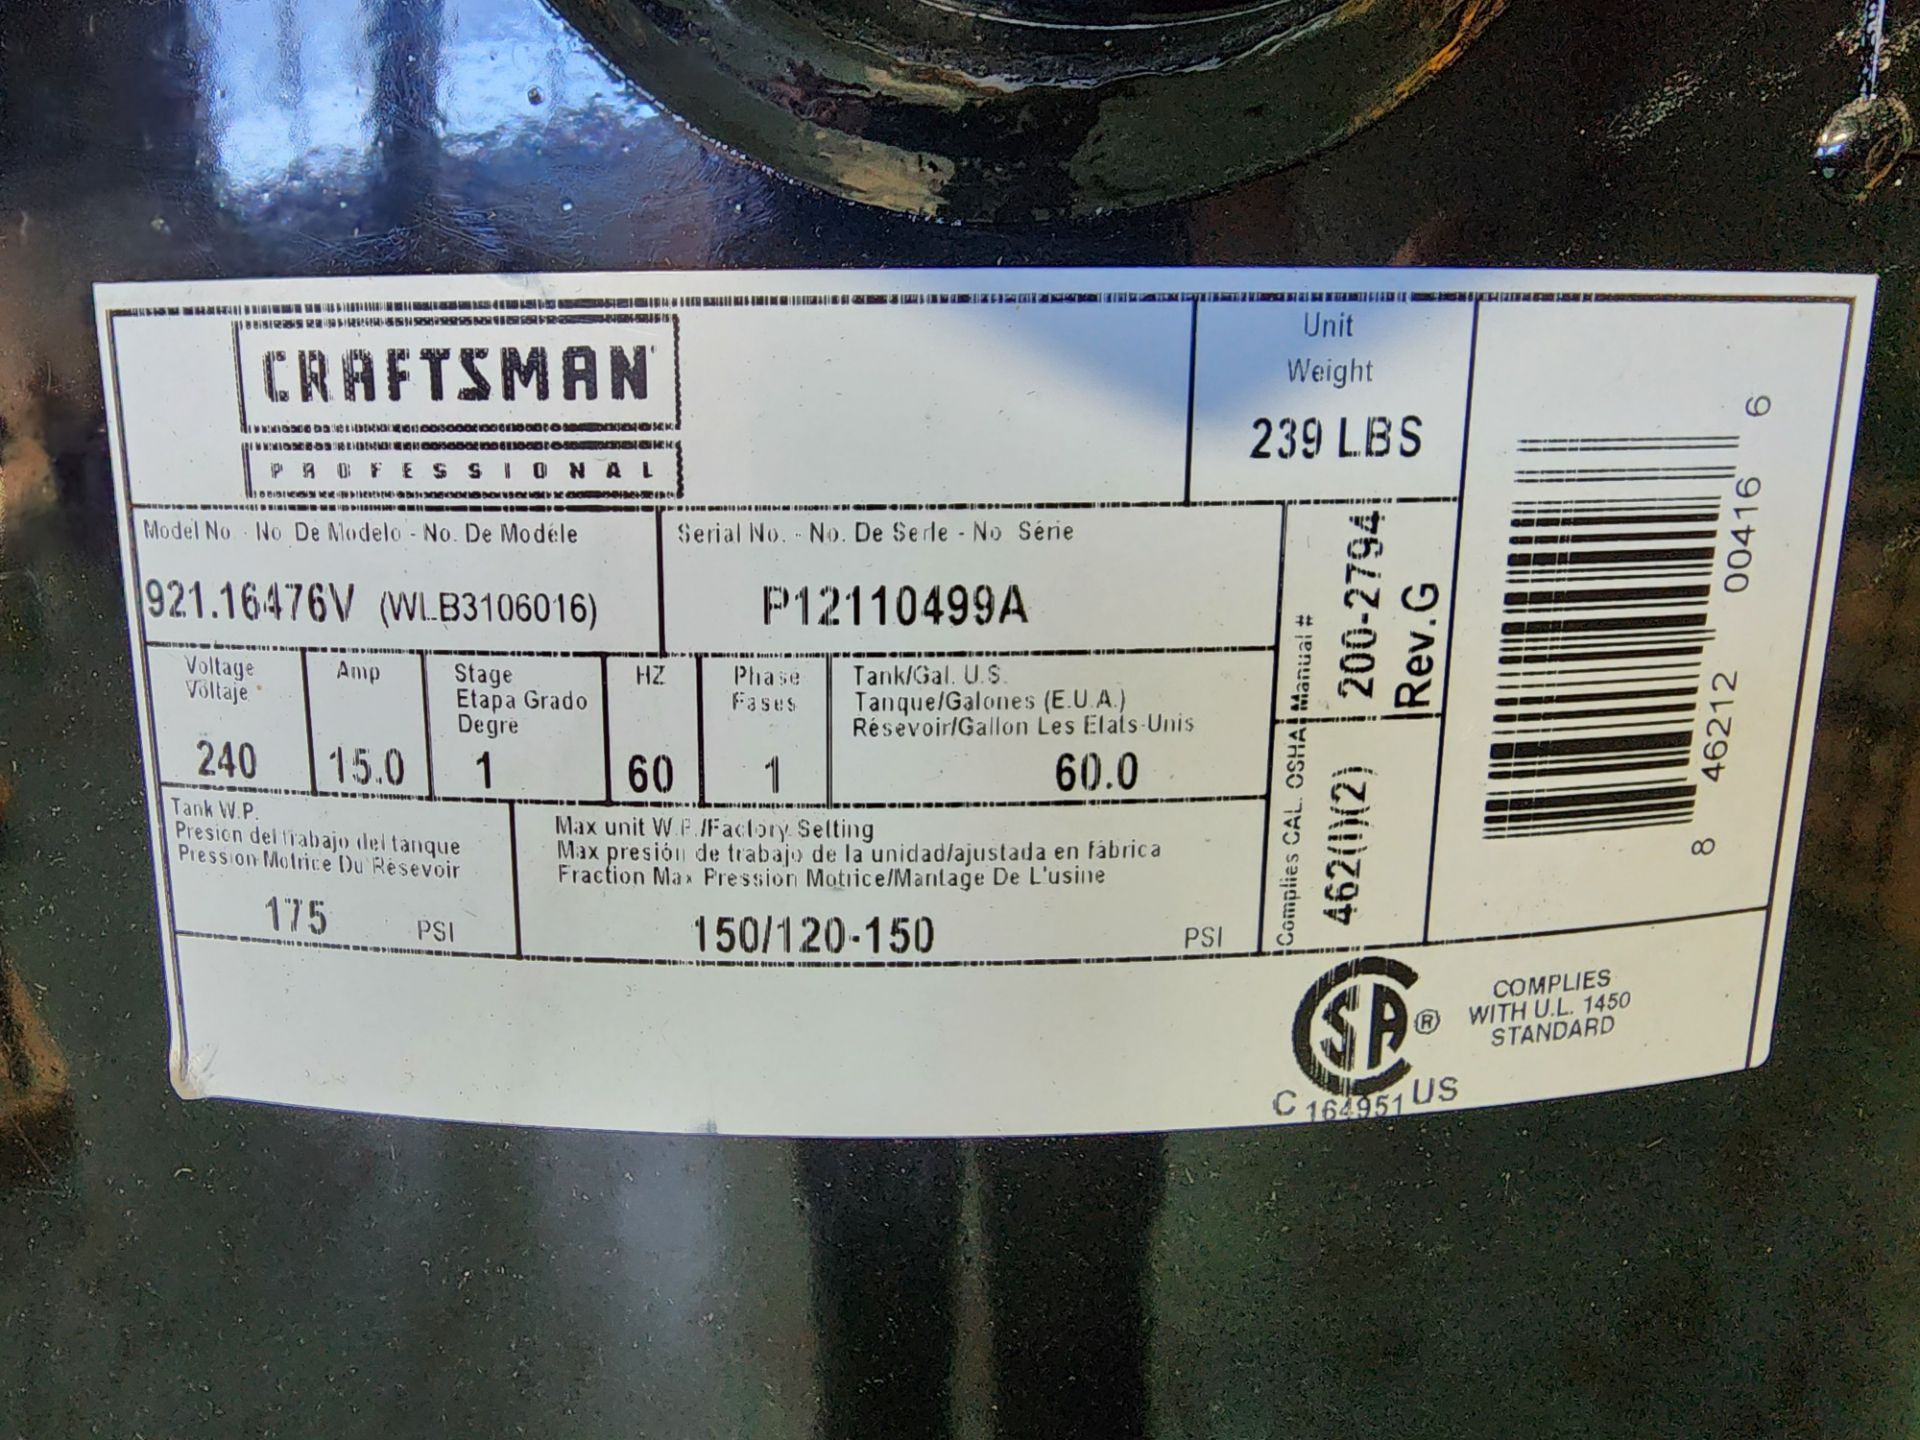 Craftsman Professional Air Compressor - LISTED AS "SALVAGE": 150 PSI, 240 Volt, 3.1 HP, 60 Gallon - Image 8 of 11